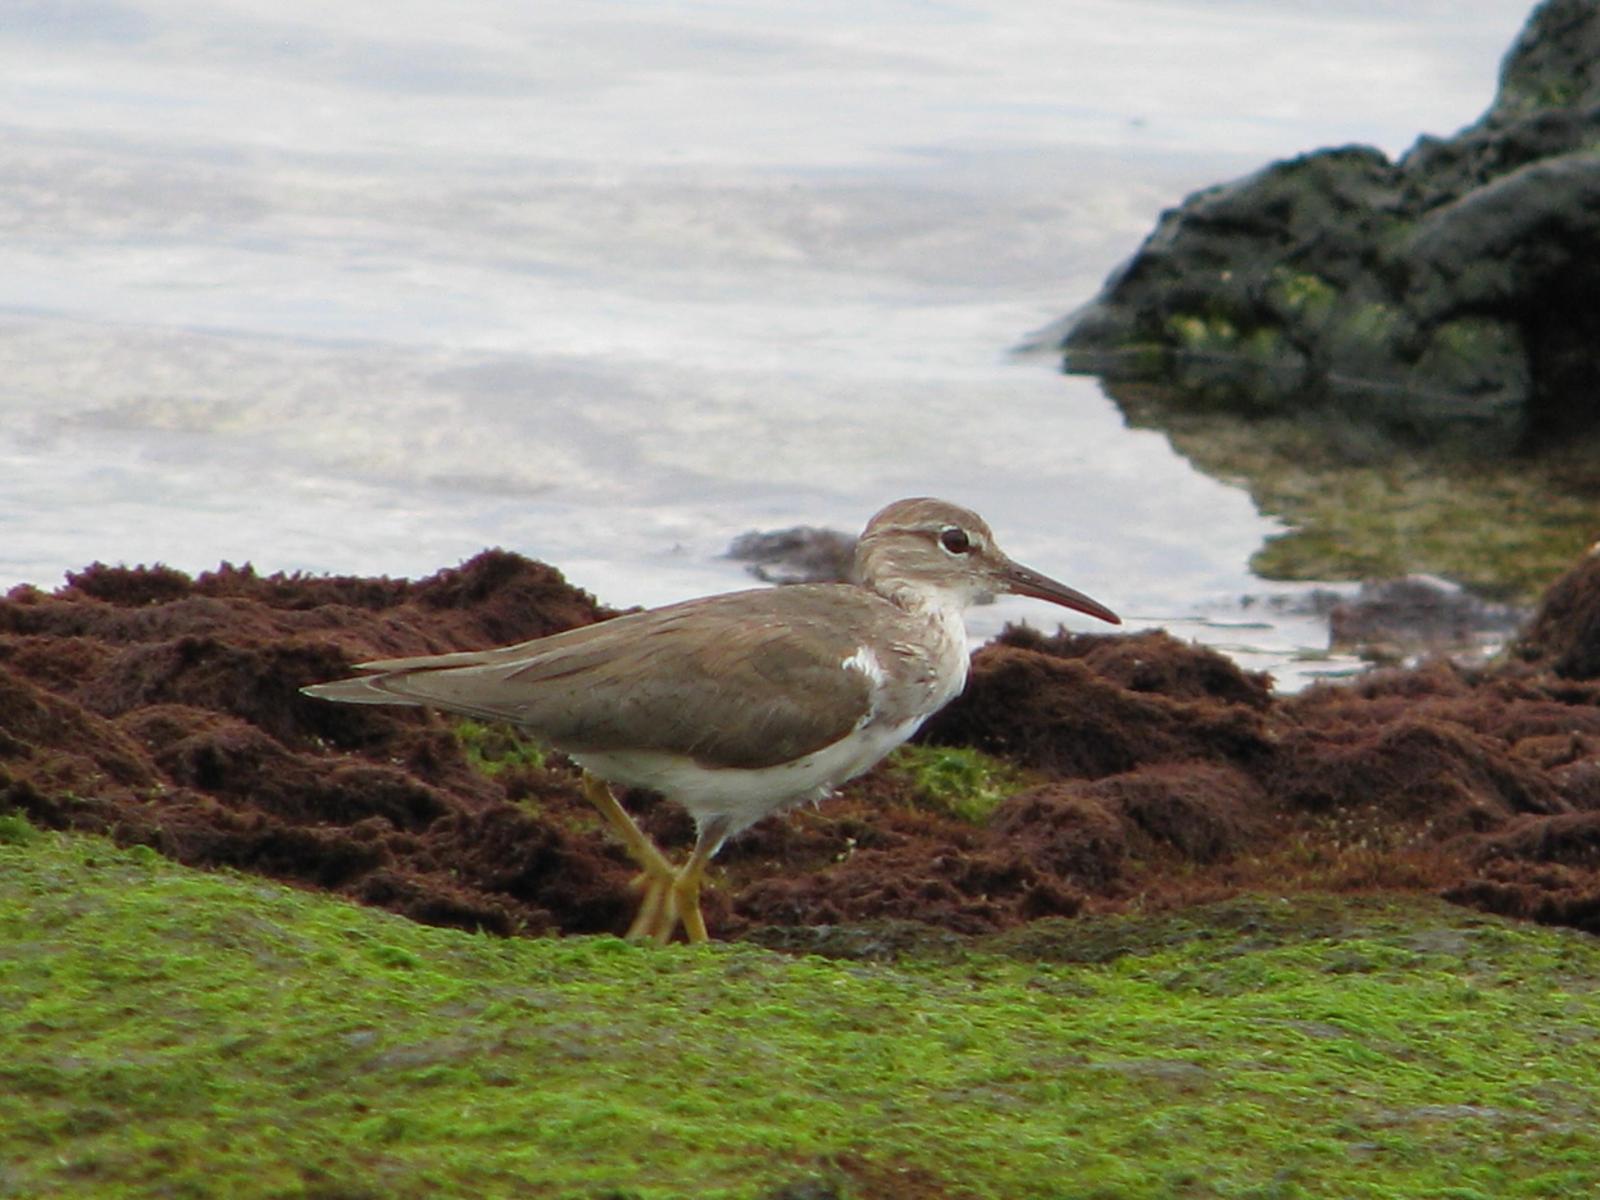 Spotted Sandpiper Photo by Ted Goshulak